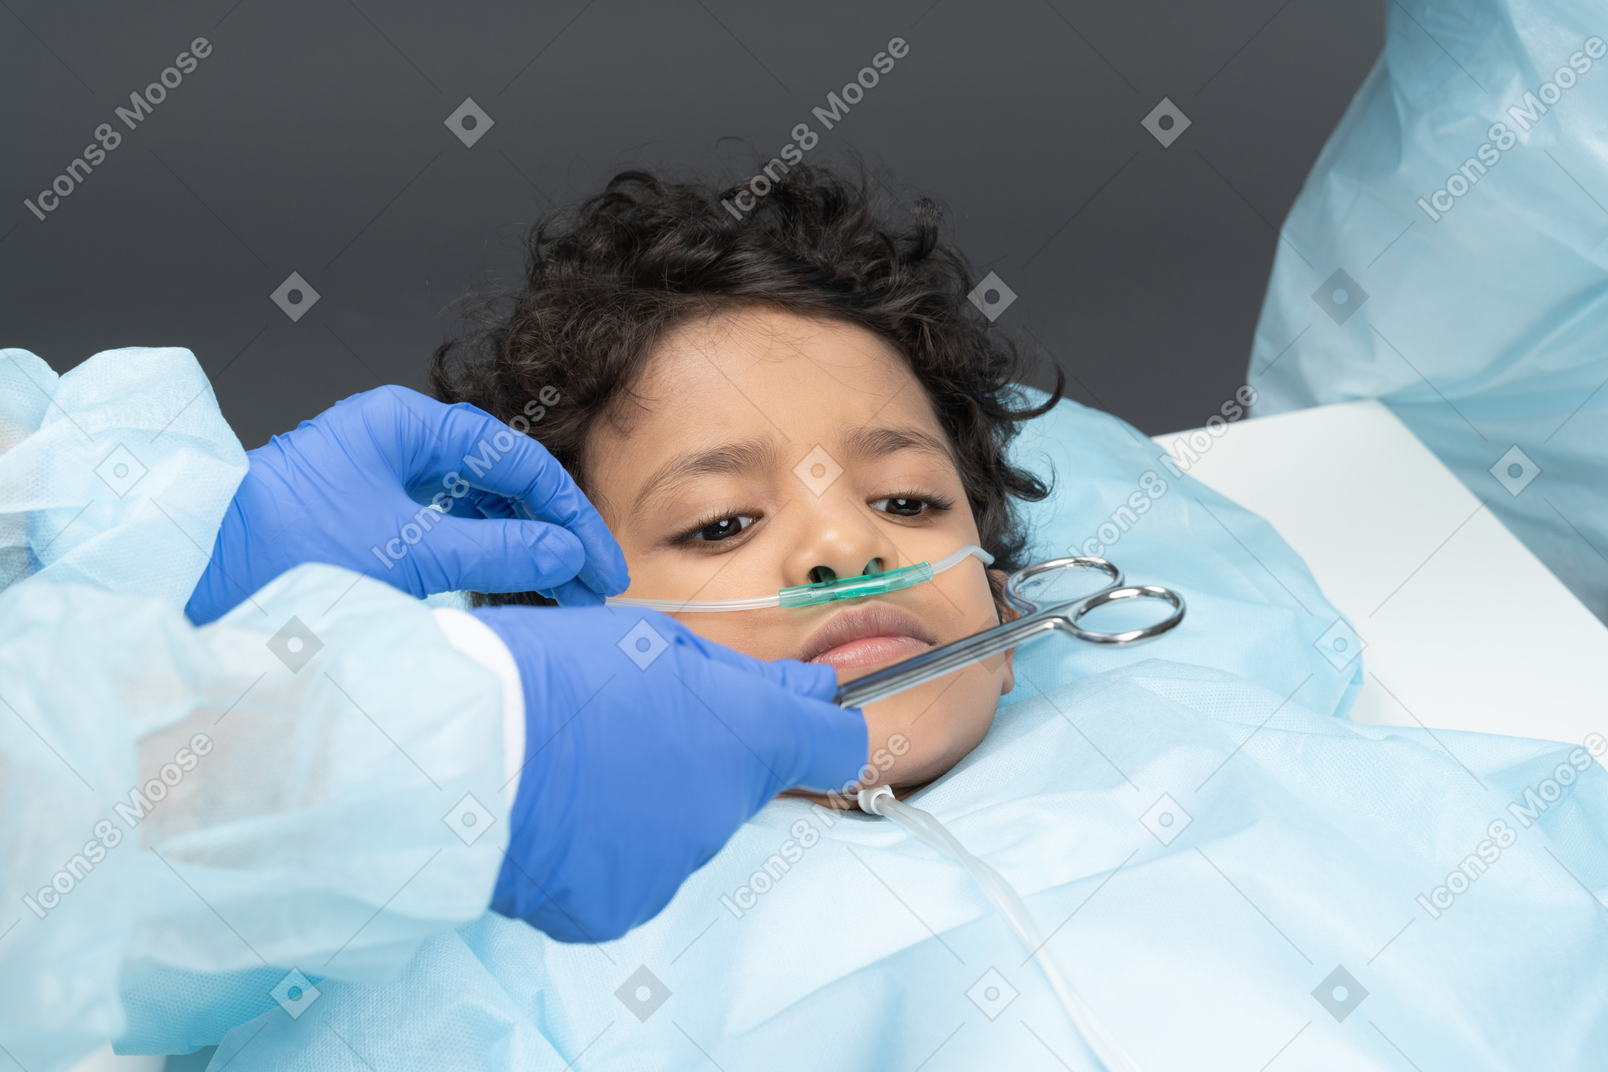 Child with nasal cannula